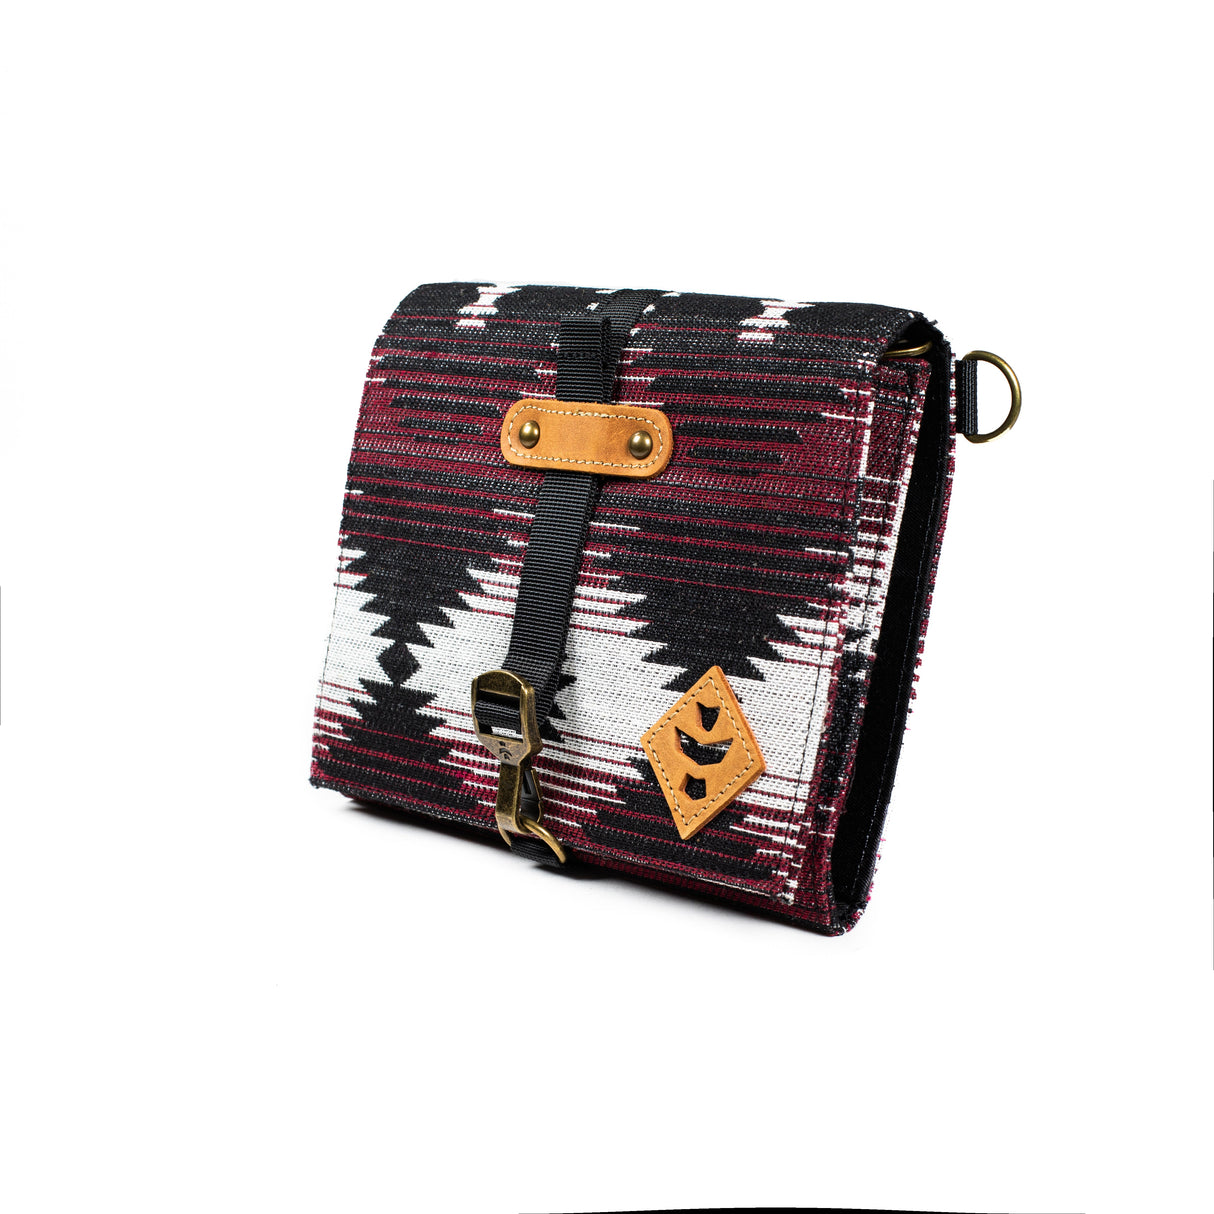 Revelry Supply The Rolling Kit - Smell Proof Case in Aztec Design, Front View